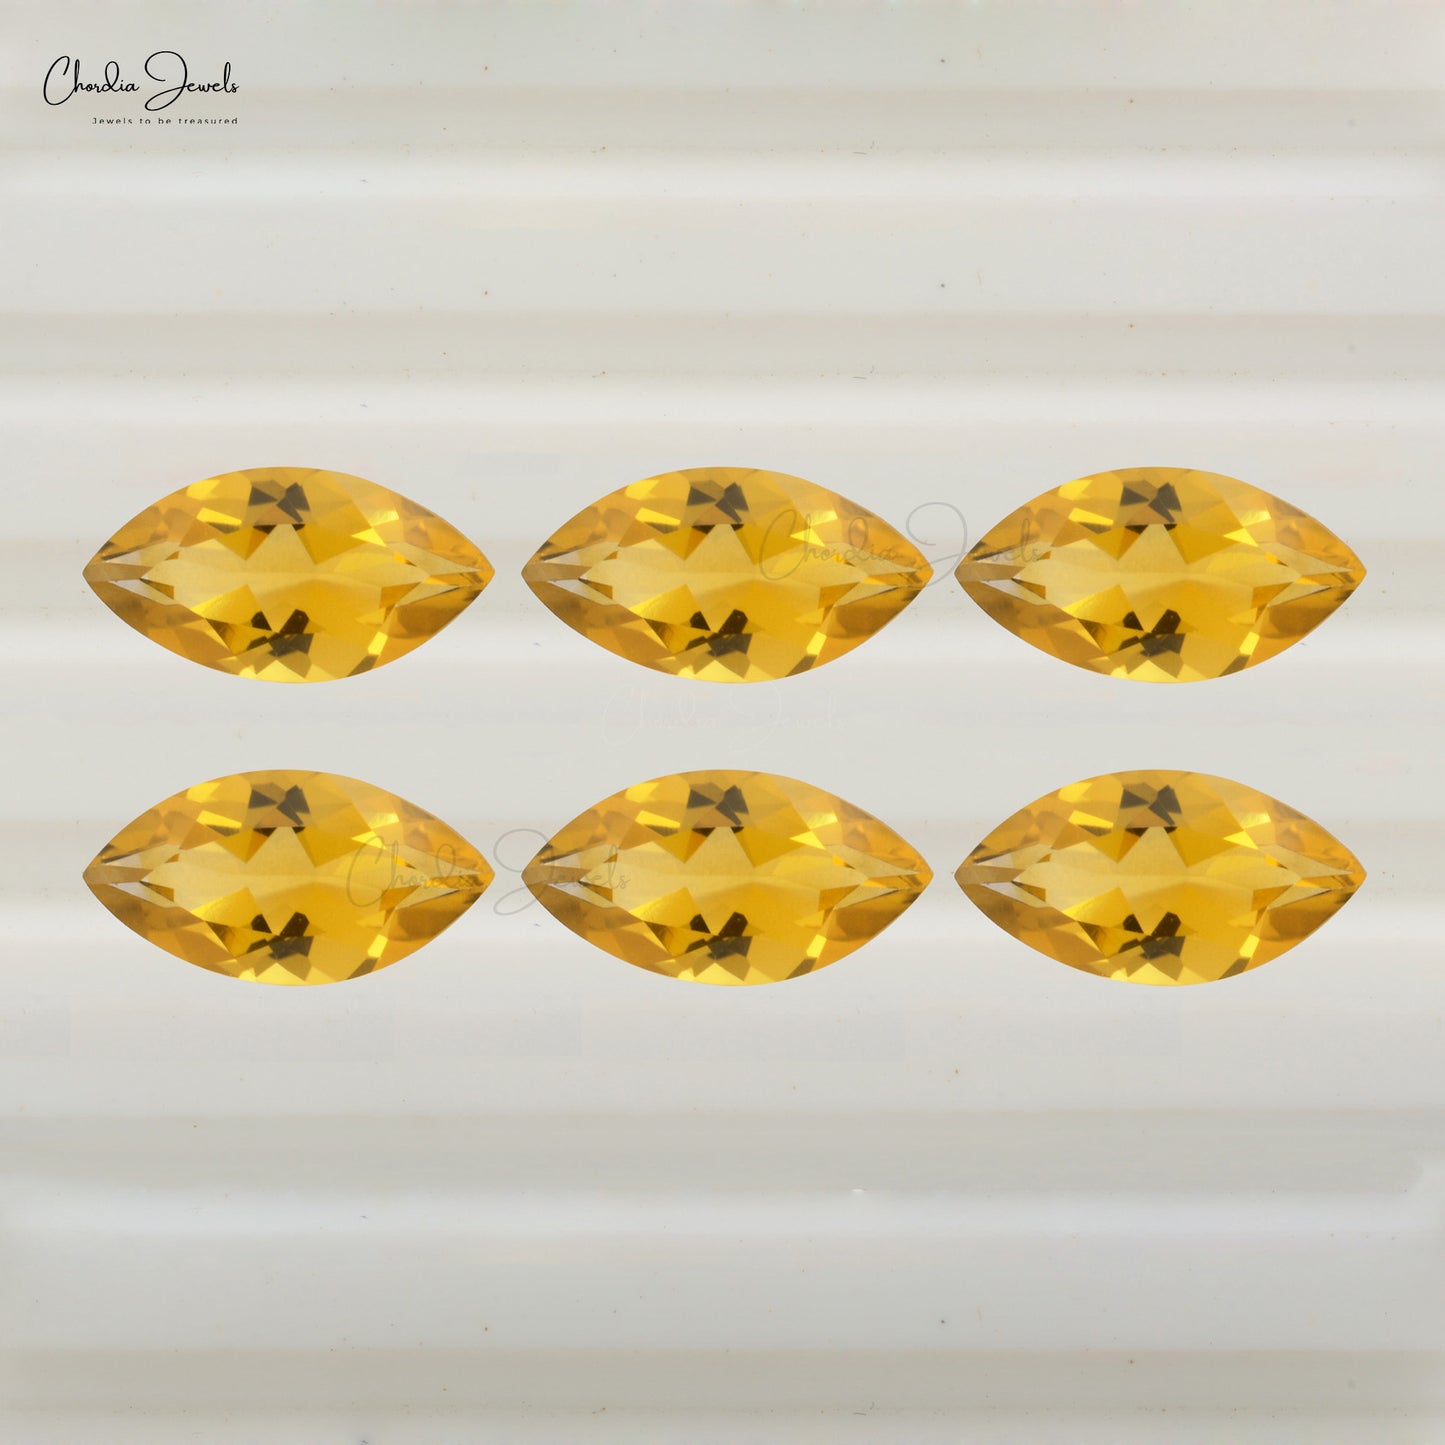 7X3.50 MM Super Fine Quality Citrine Marquise Loose Gemstone for Jewelry, 1 Piece